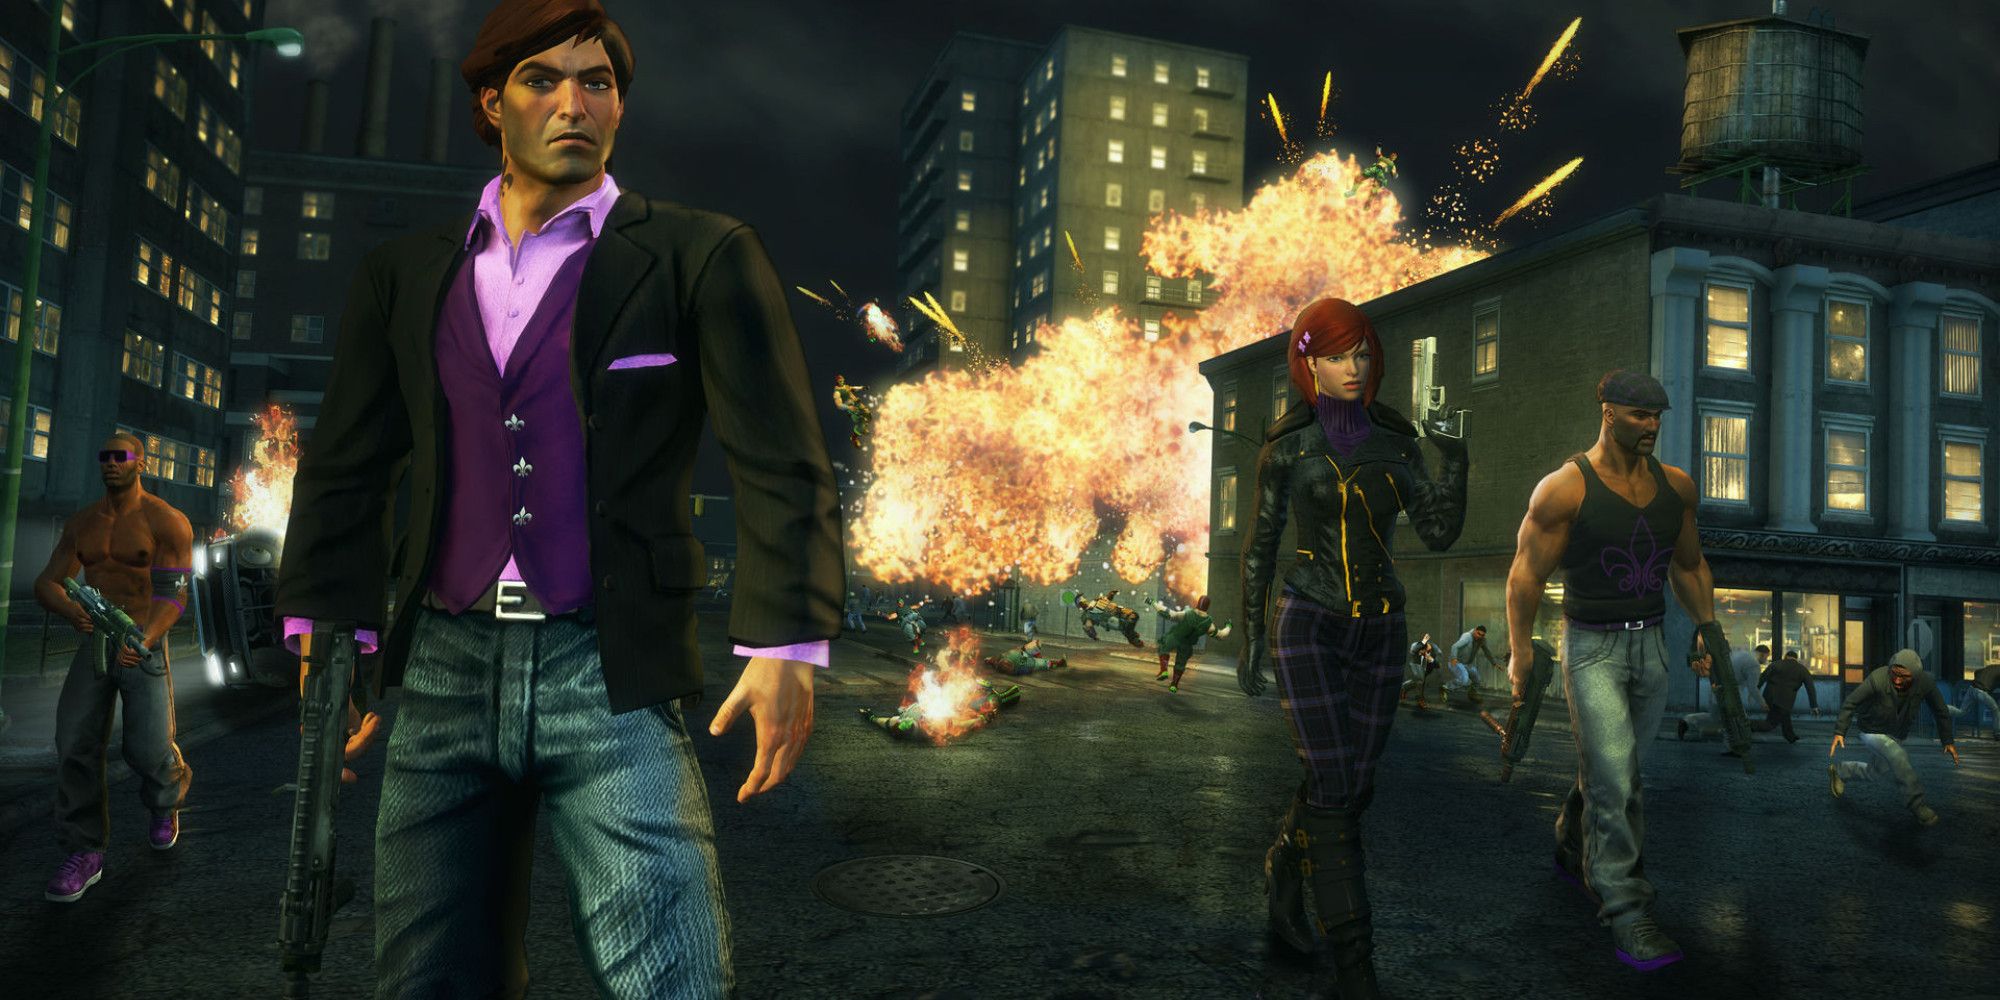 Saints Row The Third: Man With Weapon Stands Before Explosion